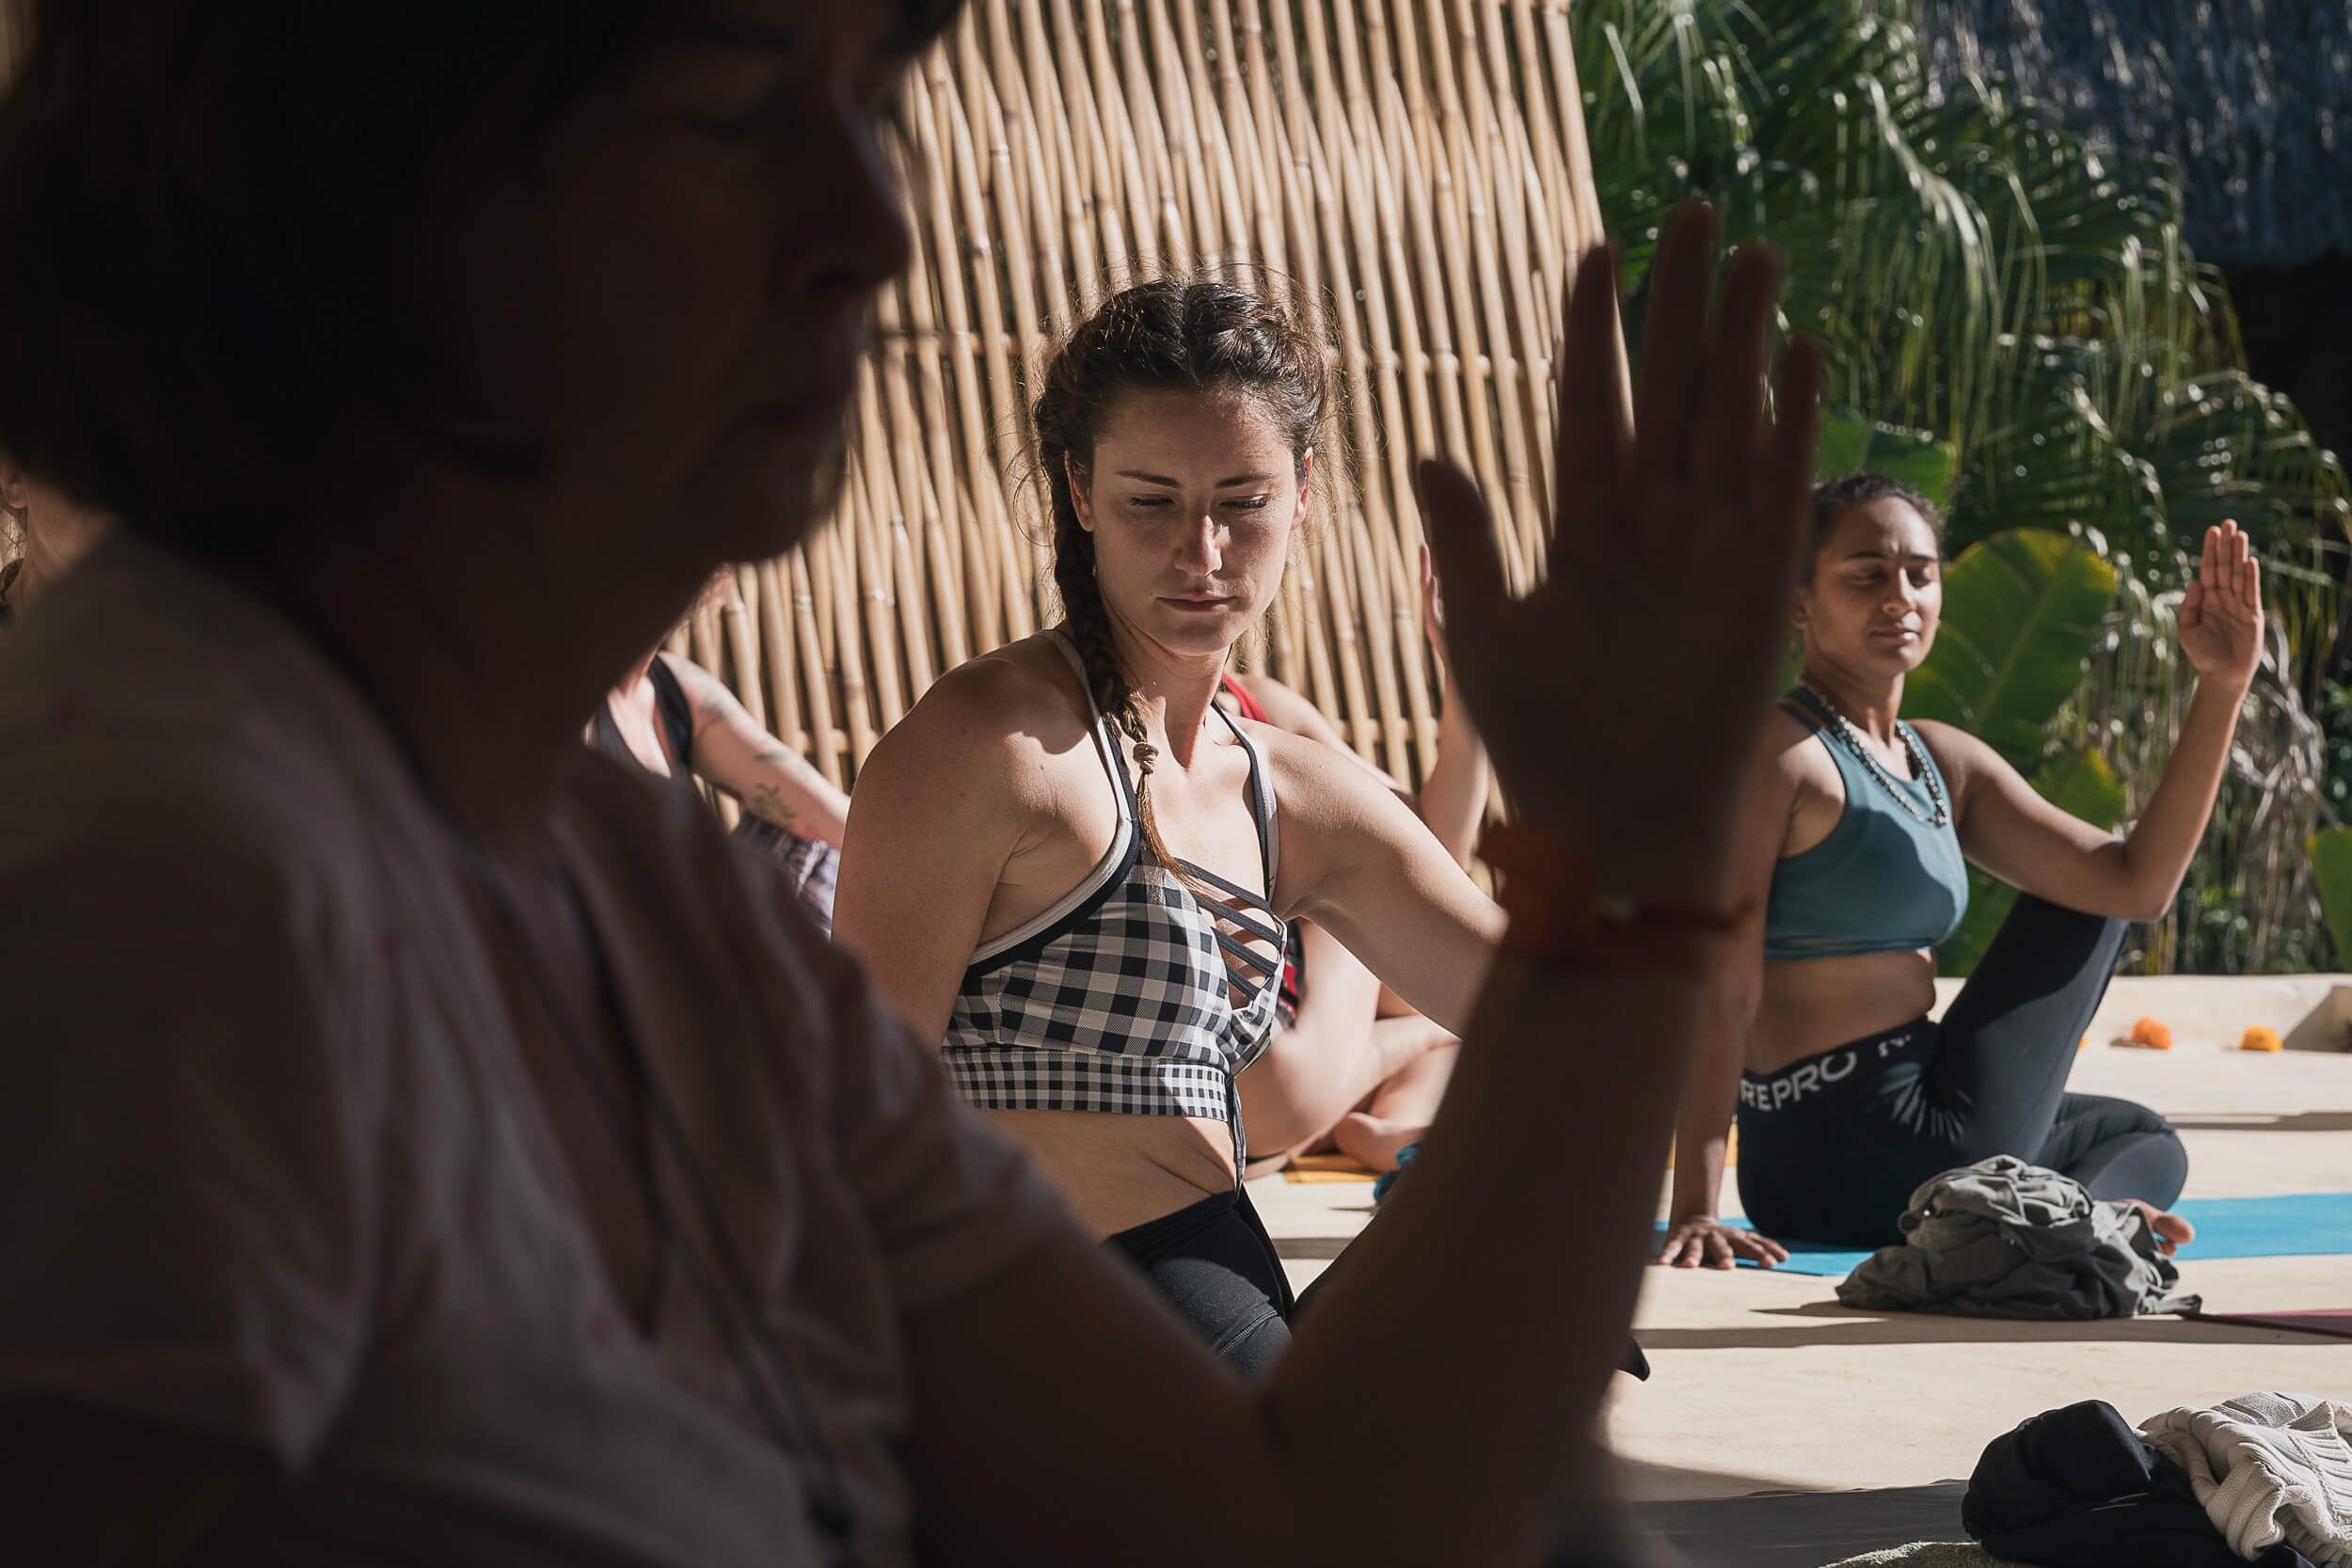 Focused group meditation during a yoga retreat in Mexico, photographed by Matt Anthony Photography, showcasing the depth of mindful practice for serene lifestyle imagery.